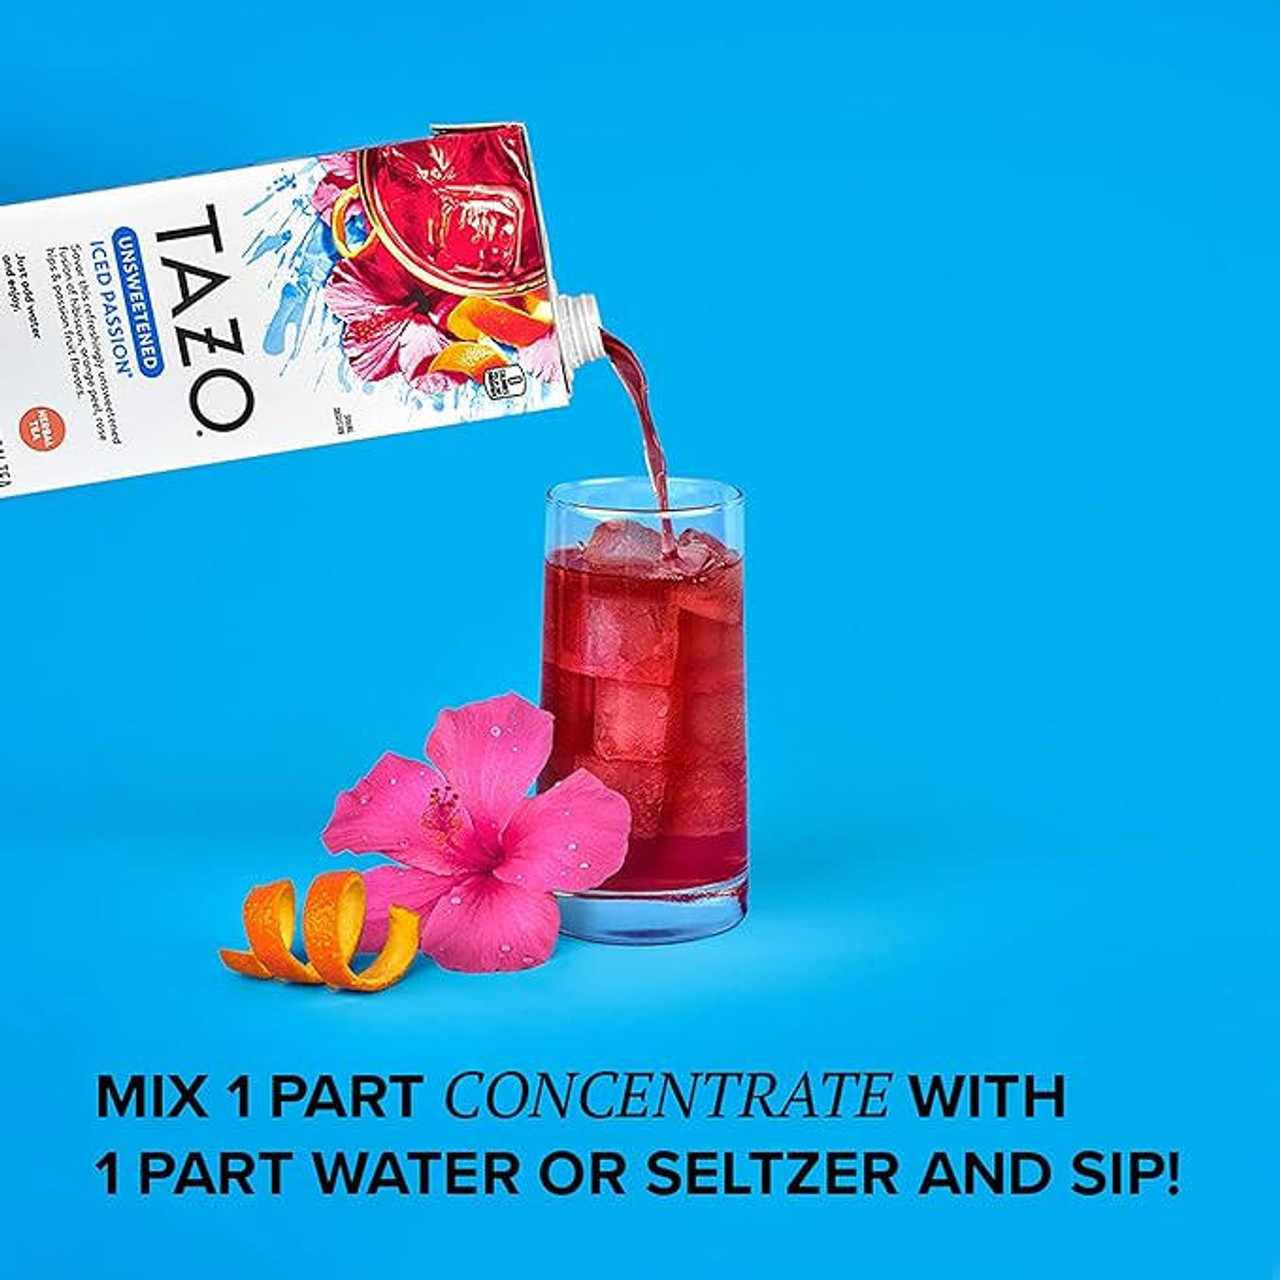  Tazo Unsweetened Rose Hips Iced Passion Tea 1:1 Concentrate 32 fl. oz. (12/Case) 